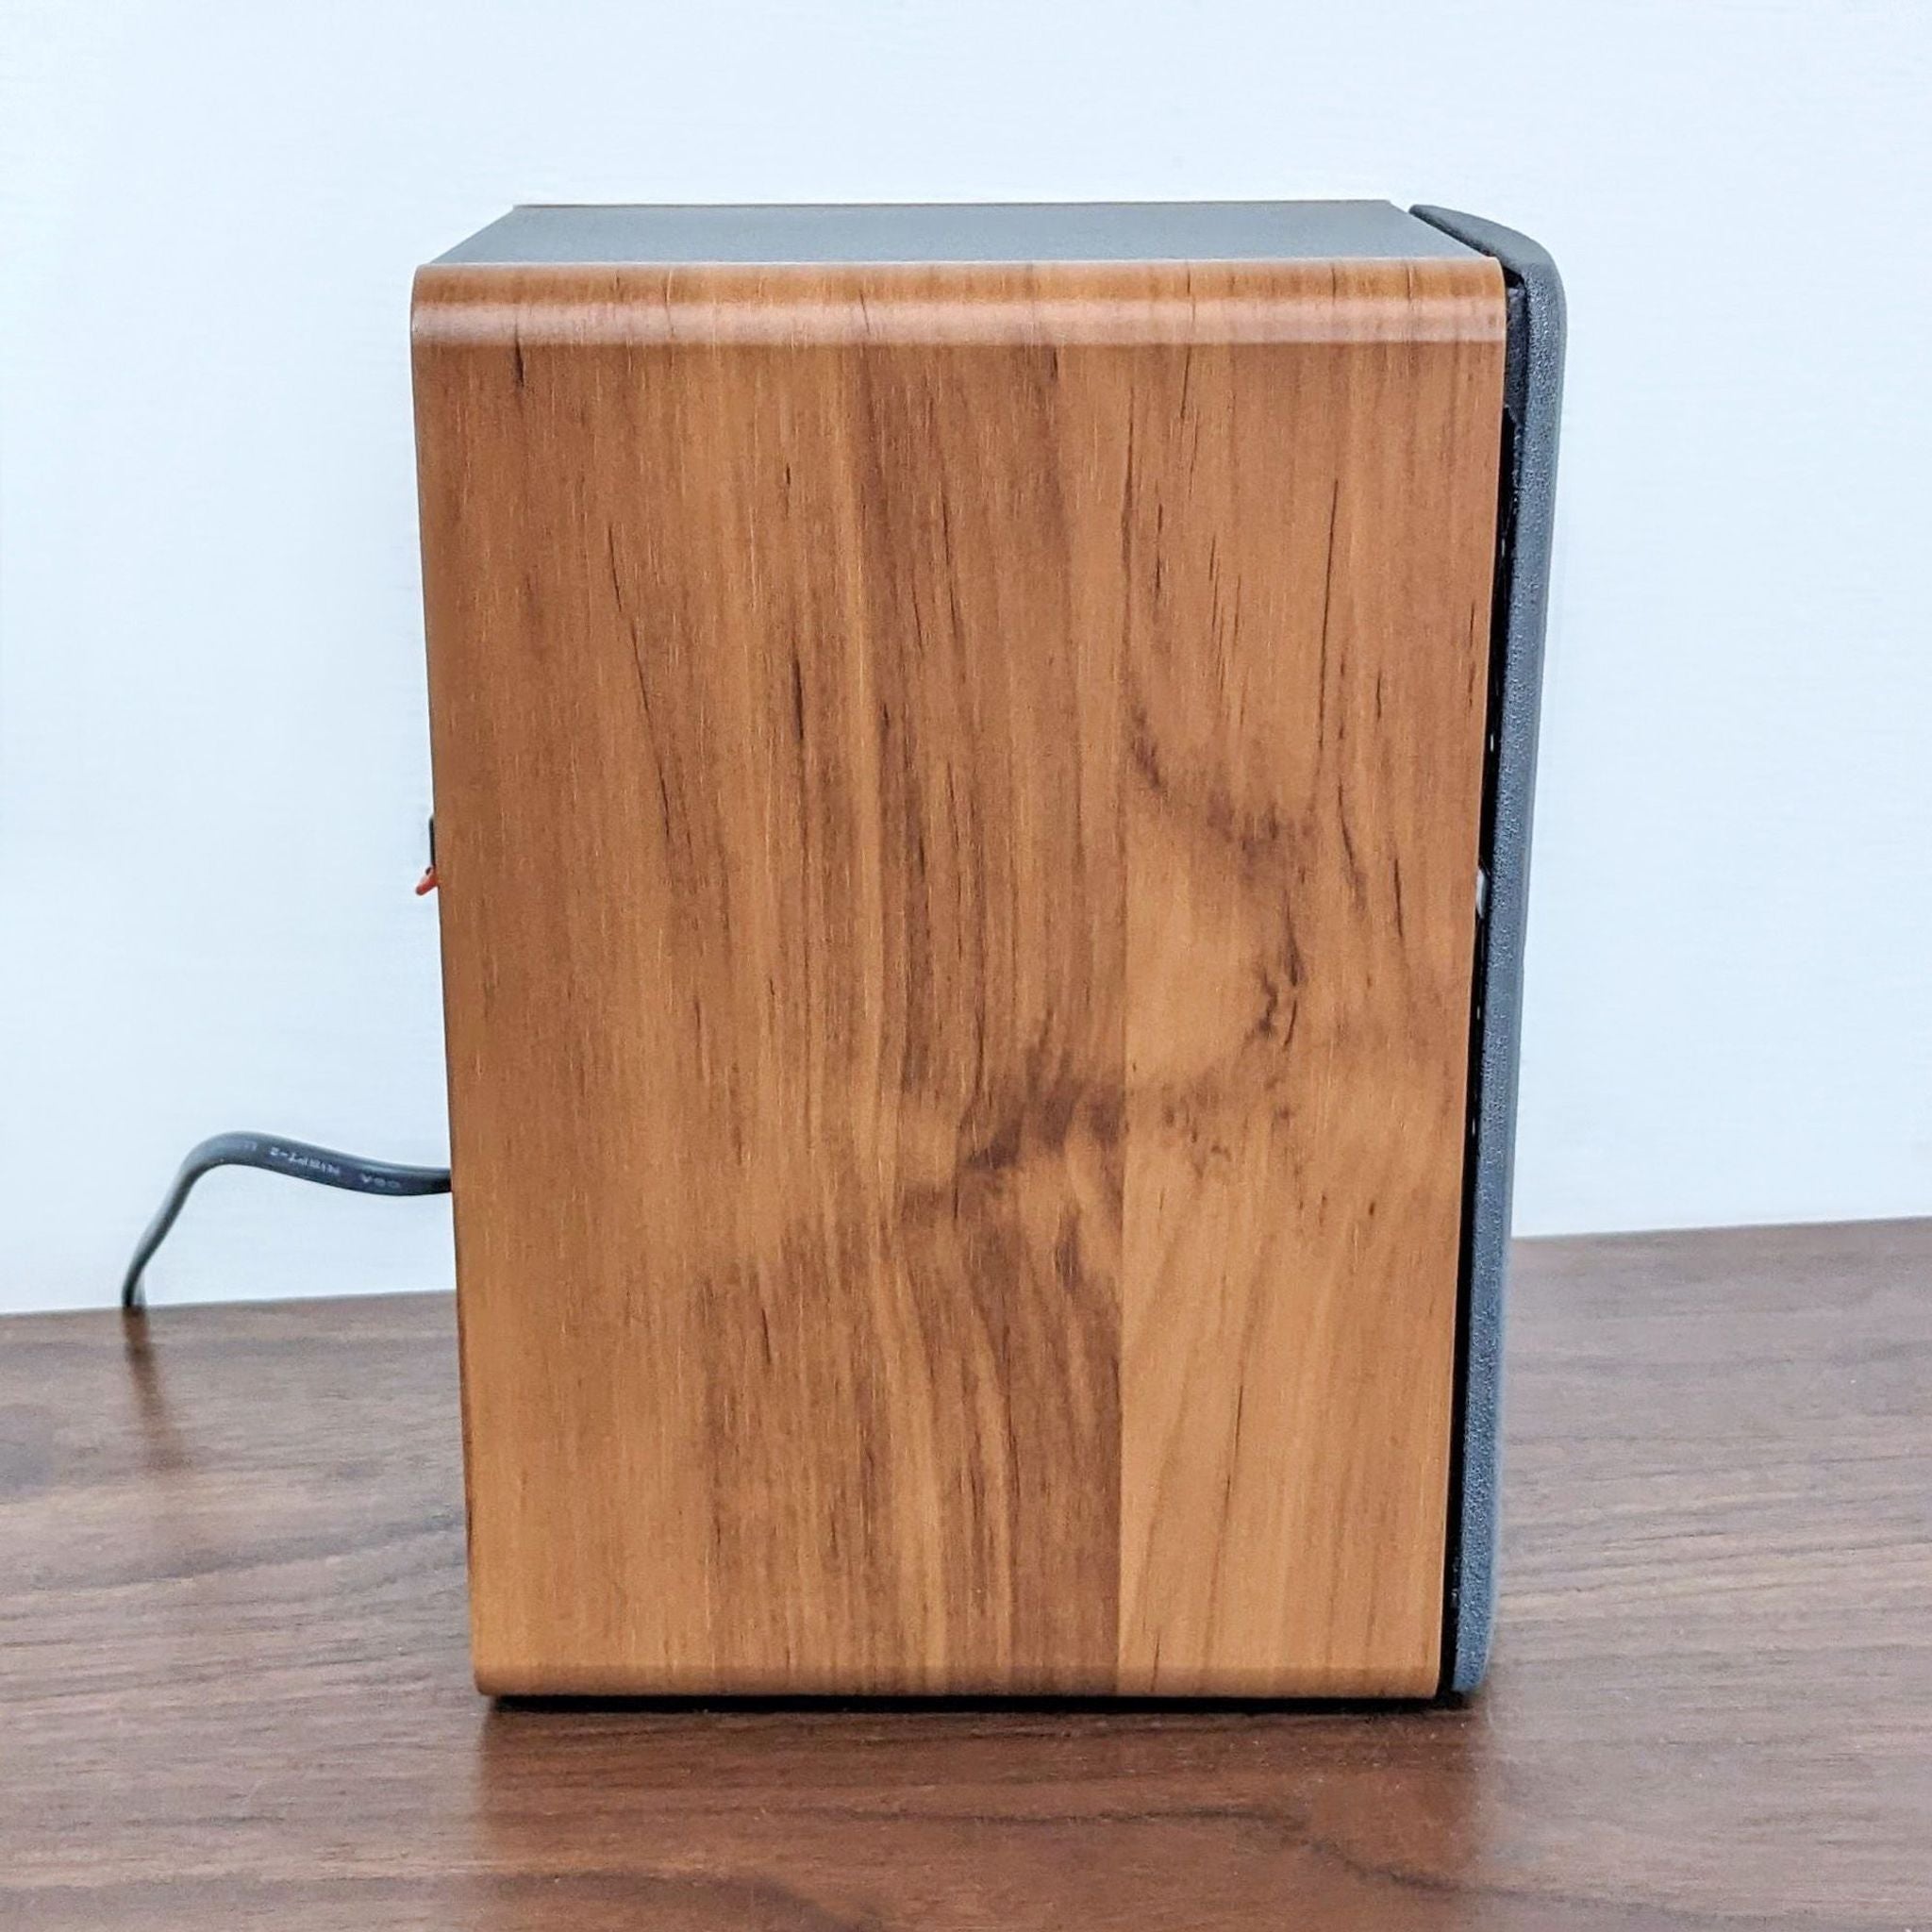 Edifier bookshelf speaker with wood finish and black accents on a table, representing quality audio equipment.